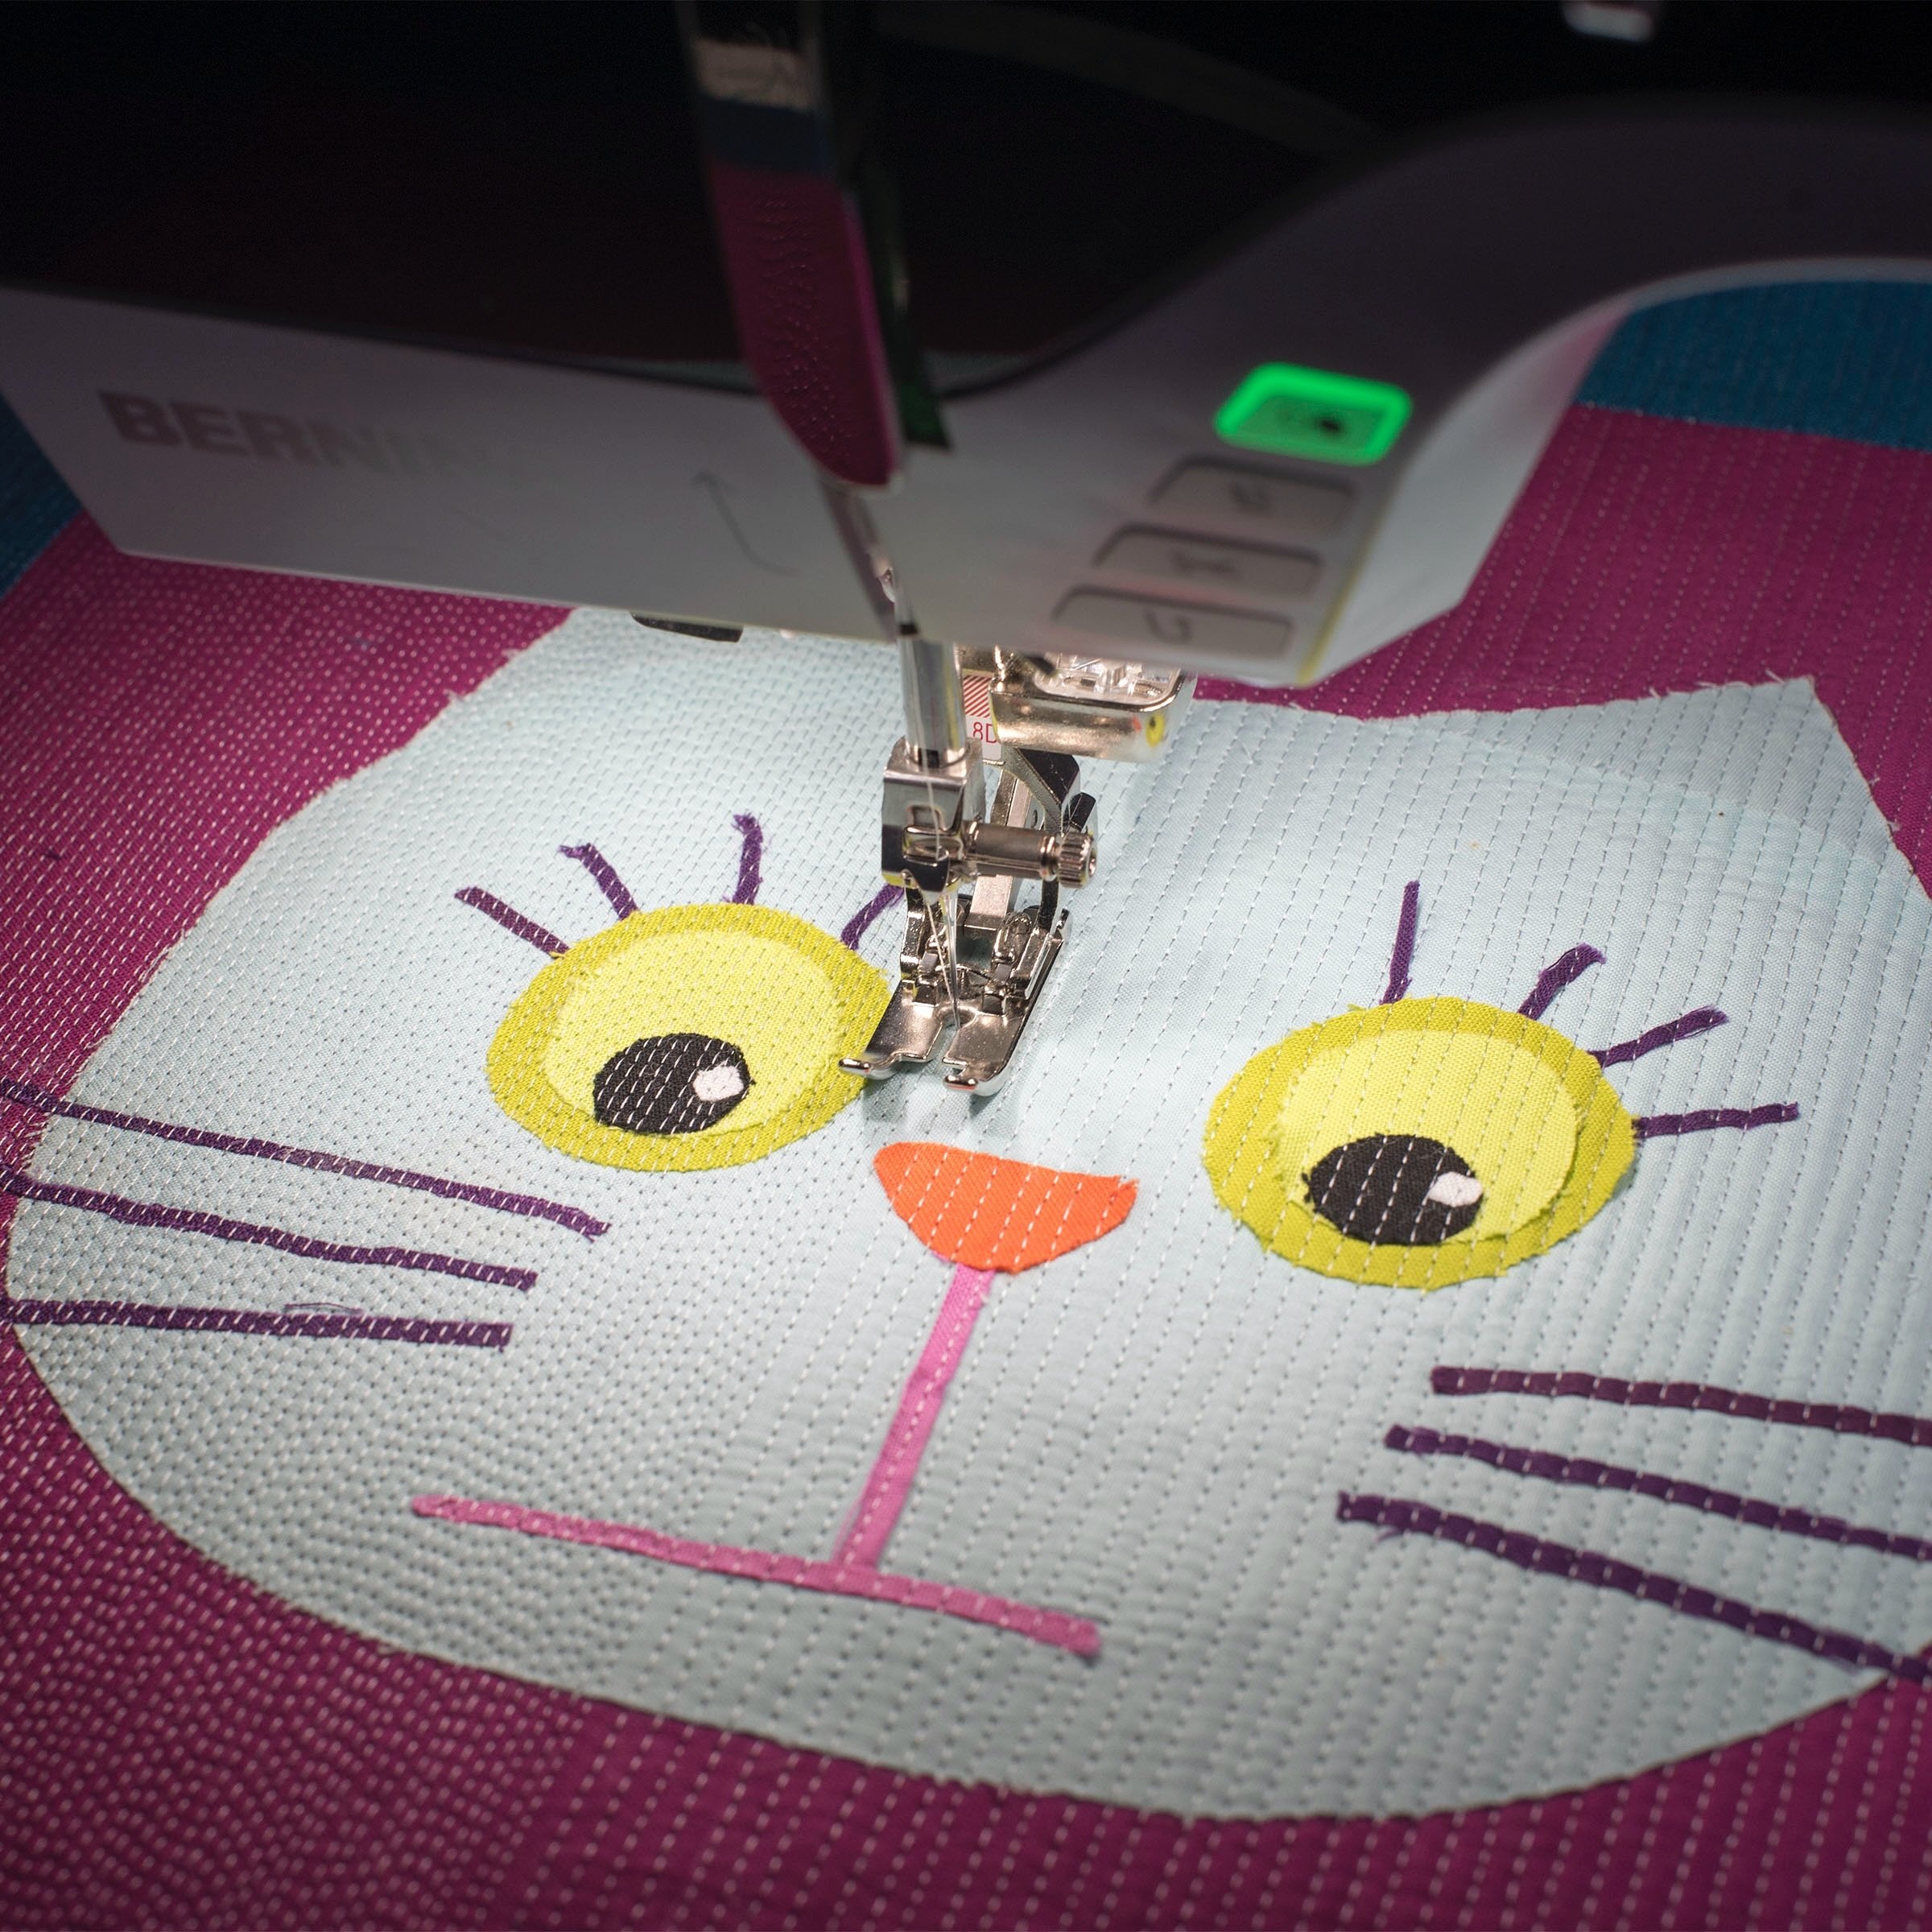 I&rsquo;ve been working on making myself a cute cat pillow. I can&rsquo;t wait until it&rsquo;s finished! 

I&rsquo;m quilting with invisafil thread by @wonderfilspecialtythread. It is thin enough for very dense quilting and without overpowering the 